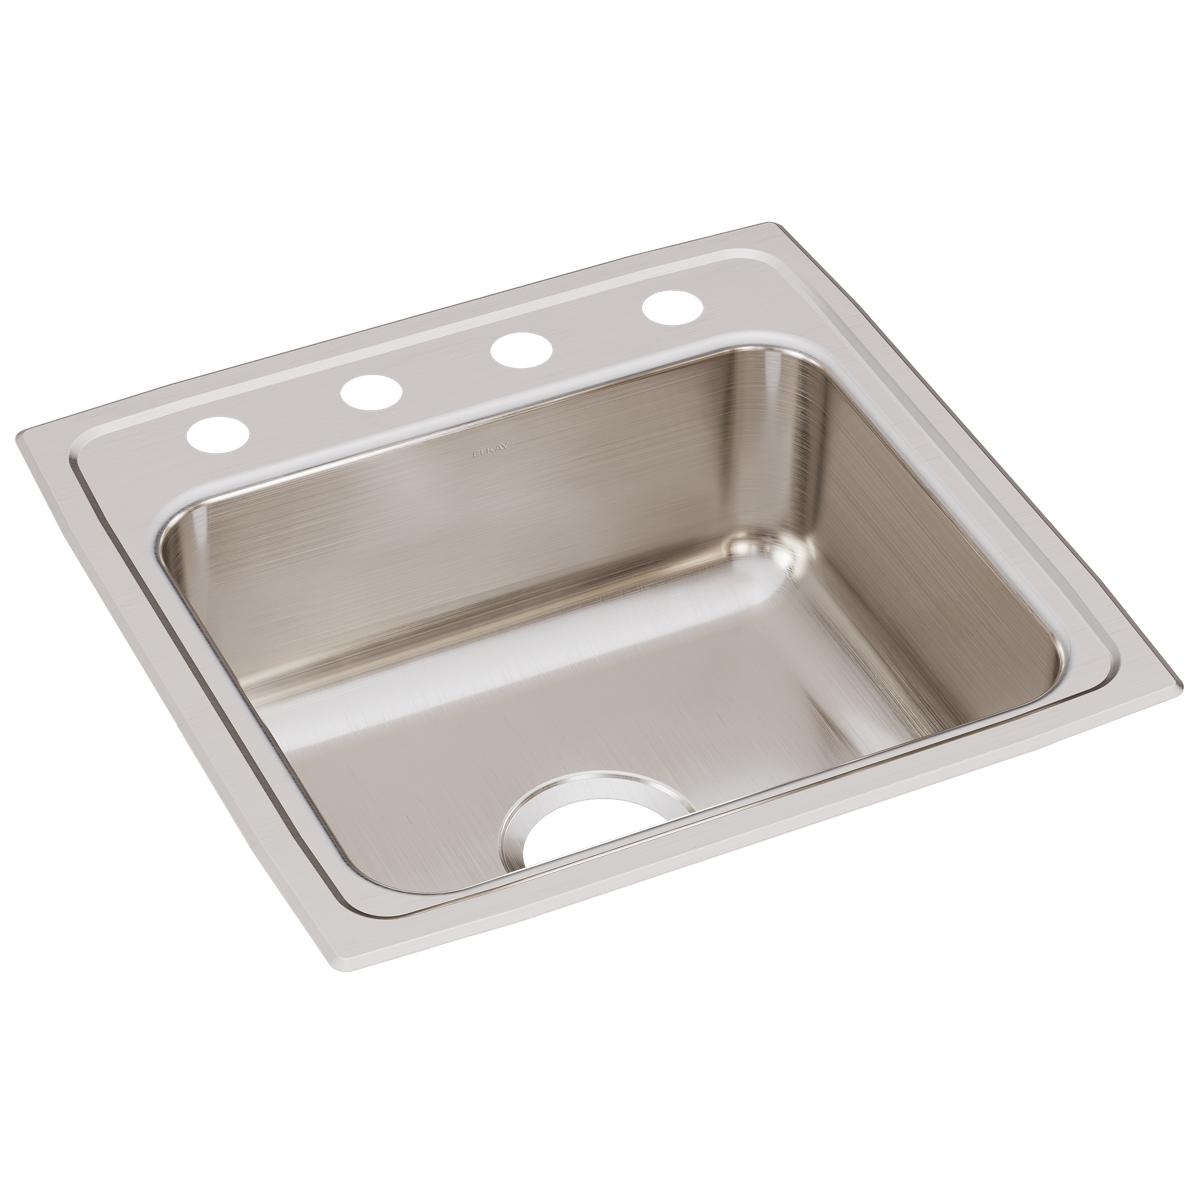 Elkay Lustertone Classic 19-1/2" x 19" x 7-1/2" OS4-Hole Single Bowl Drop-in Sink with Quick-clip